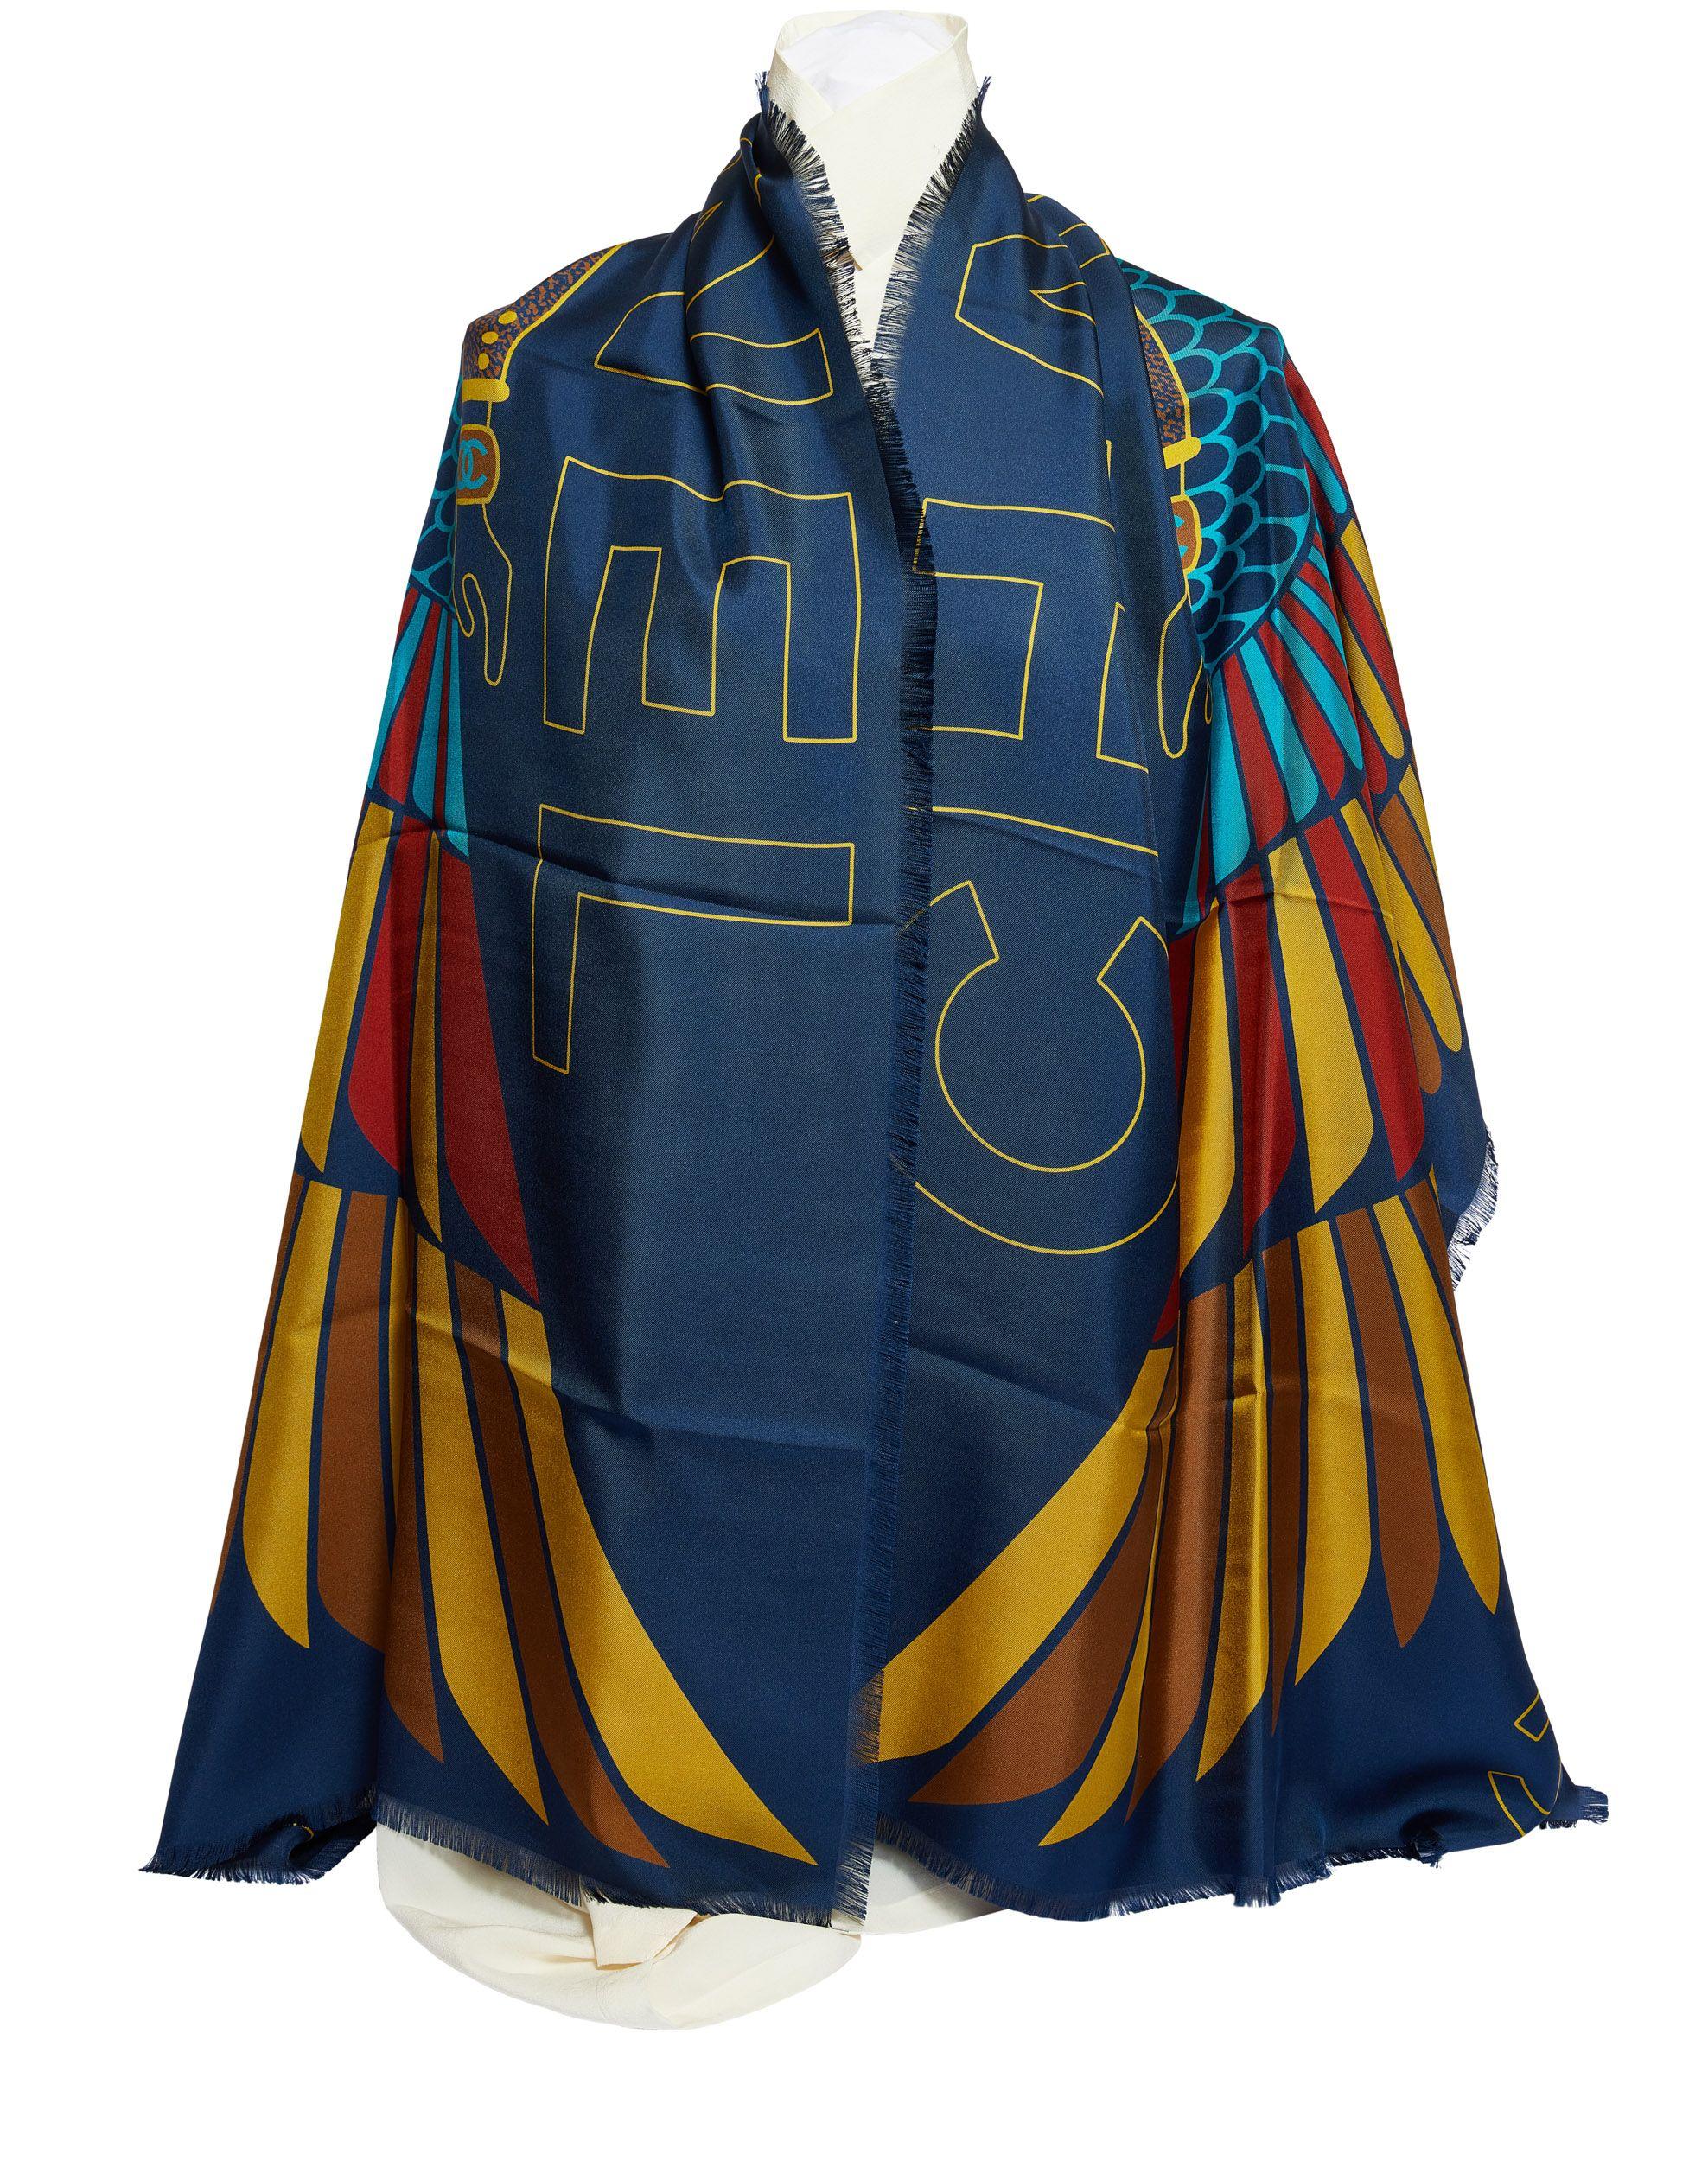 Chanel Egyptian collection blue silk shawl. The piece has a red, blue and gold design with a female pharaoh. It is brand new.